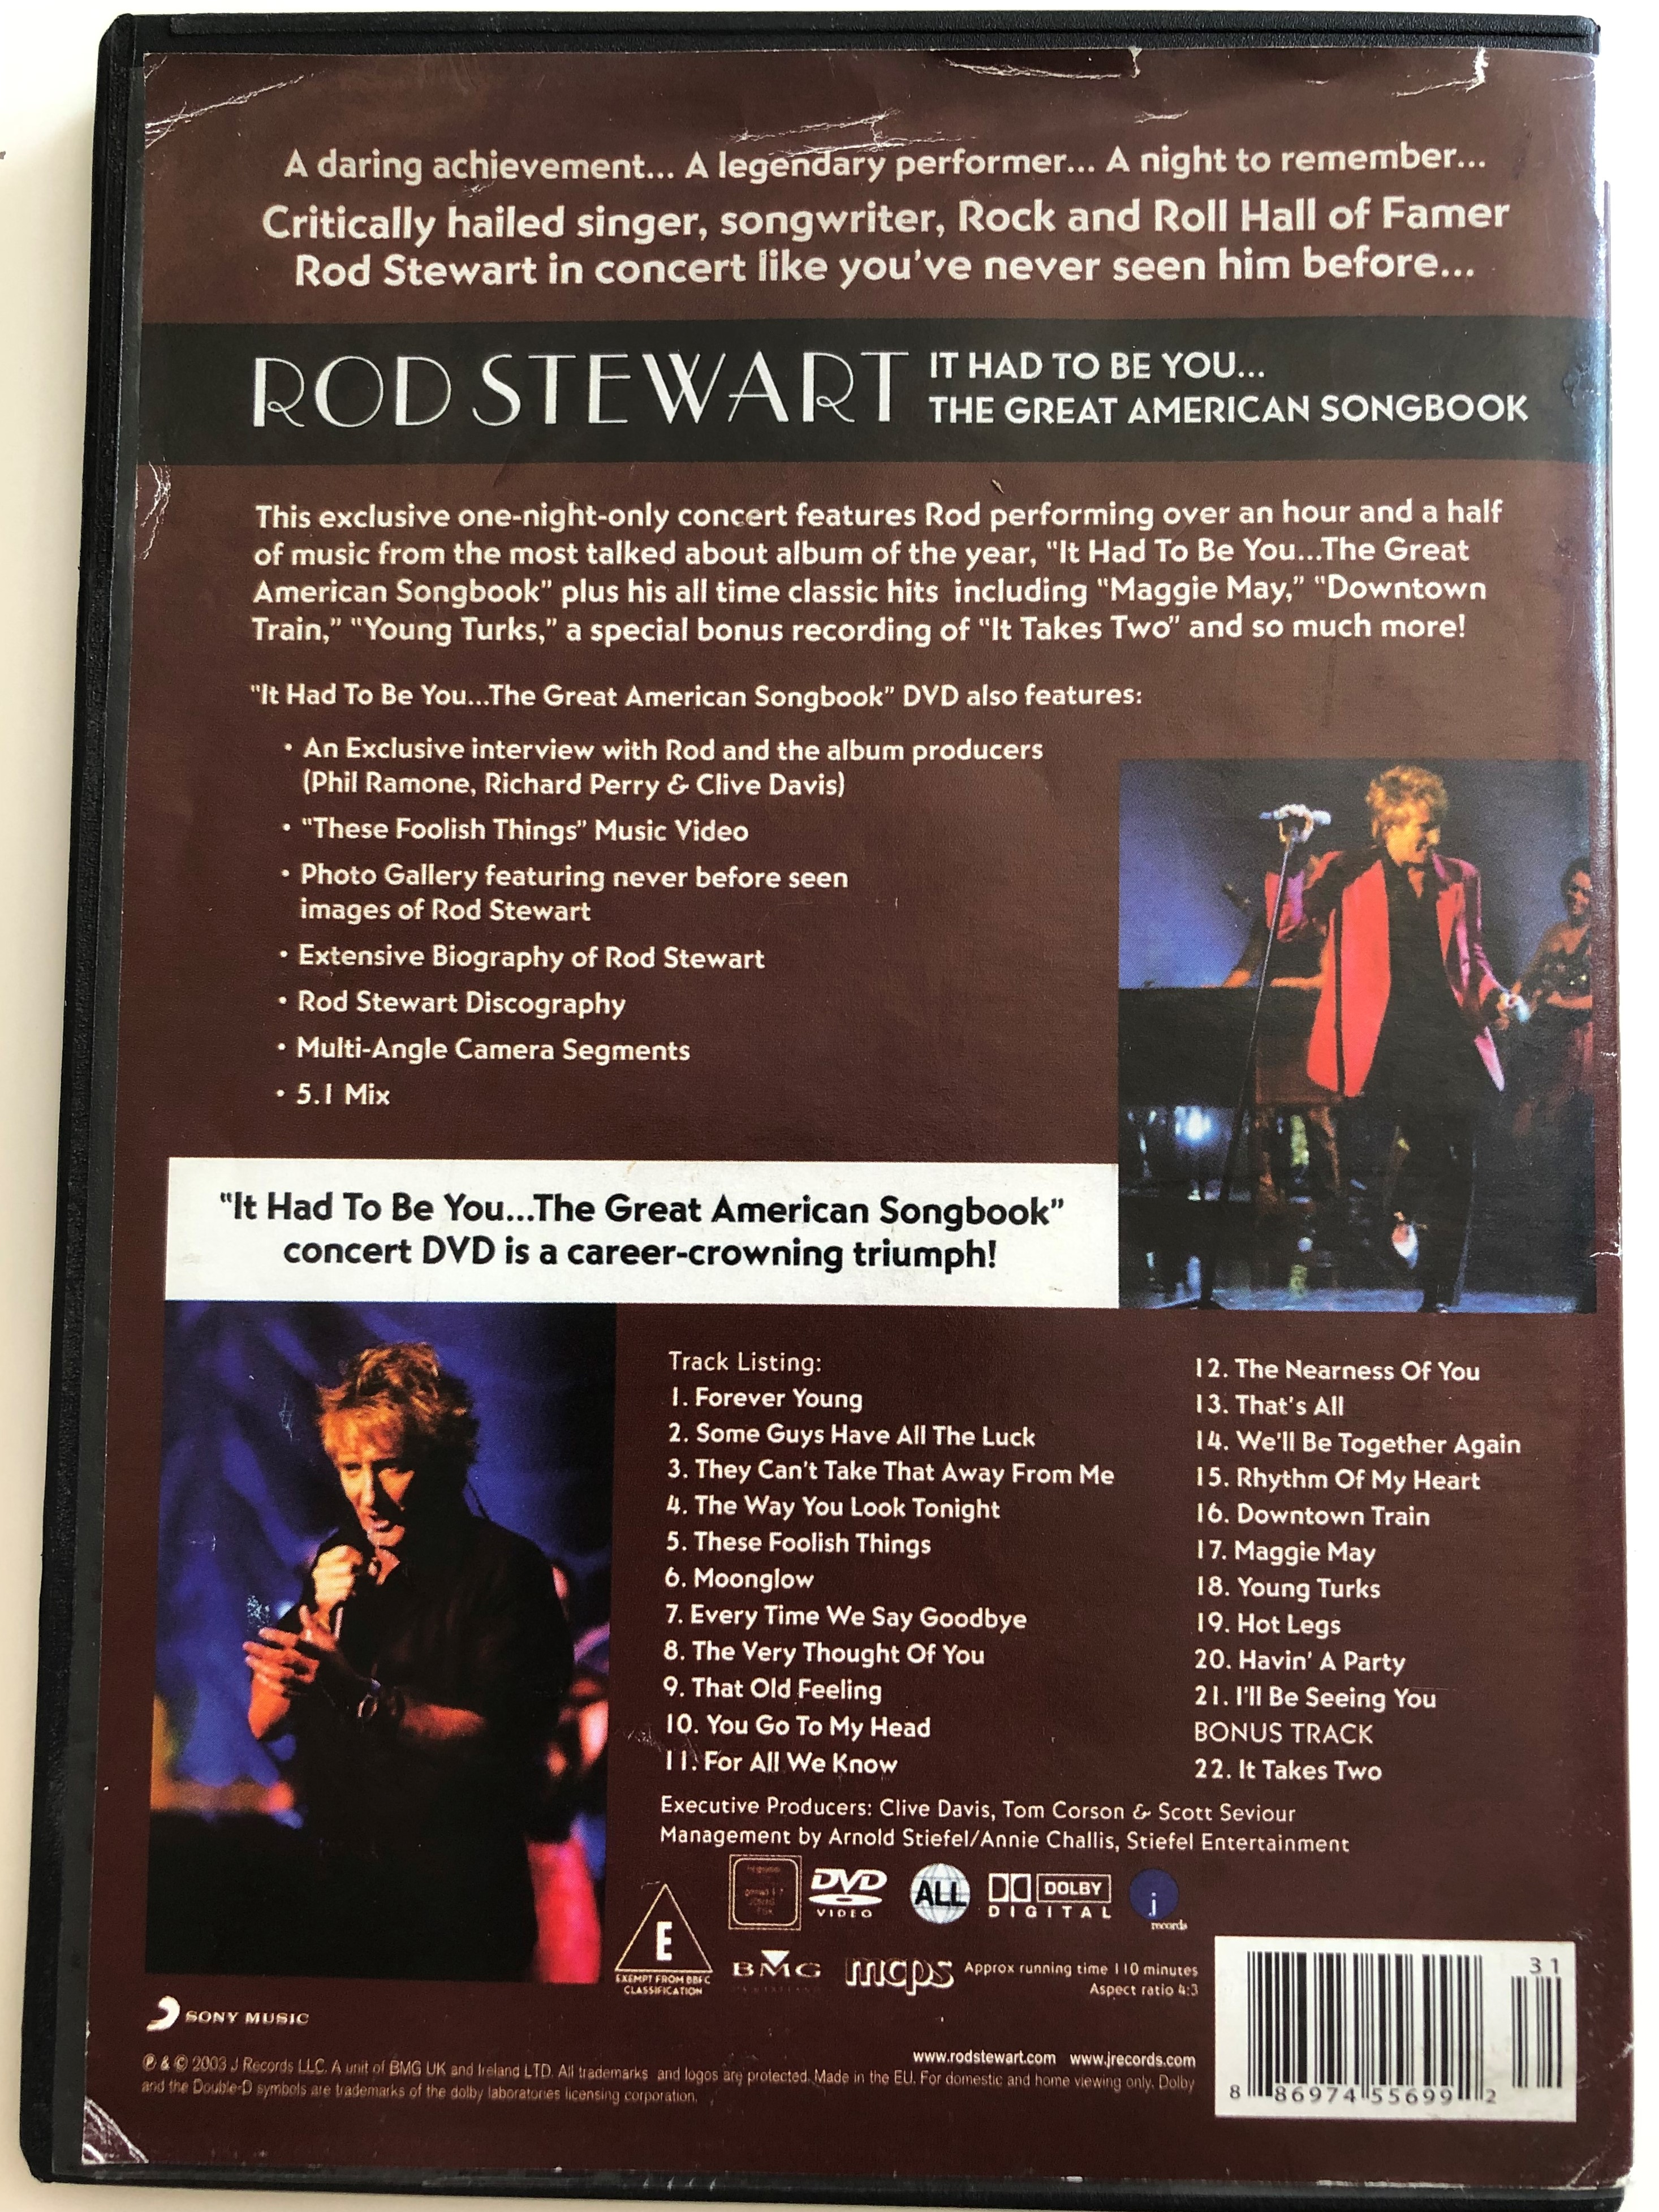 rod-stewart-dvd-2003-it-had-to-be-you...-the-great-american-songbook-the-multi-platinum-album-event-of-the-year-now-on-dvd-2-.jpg